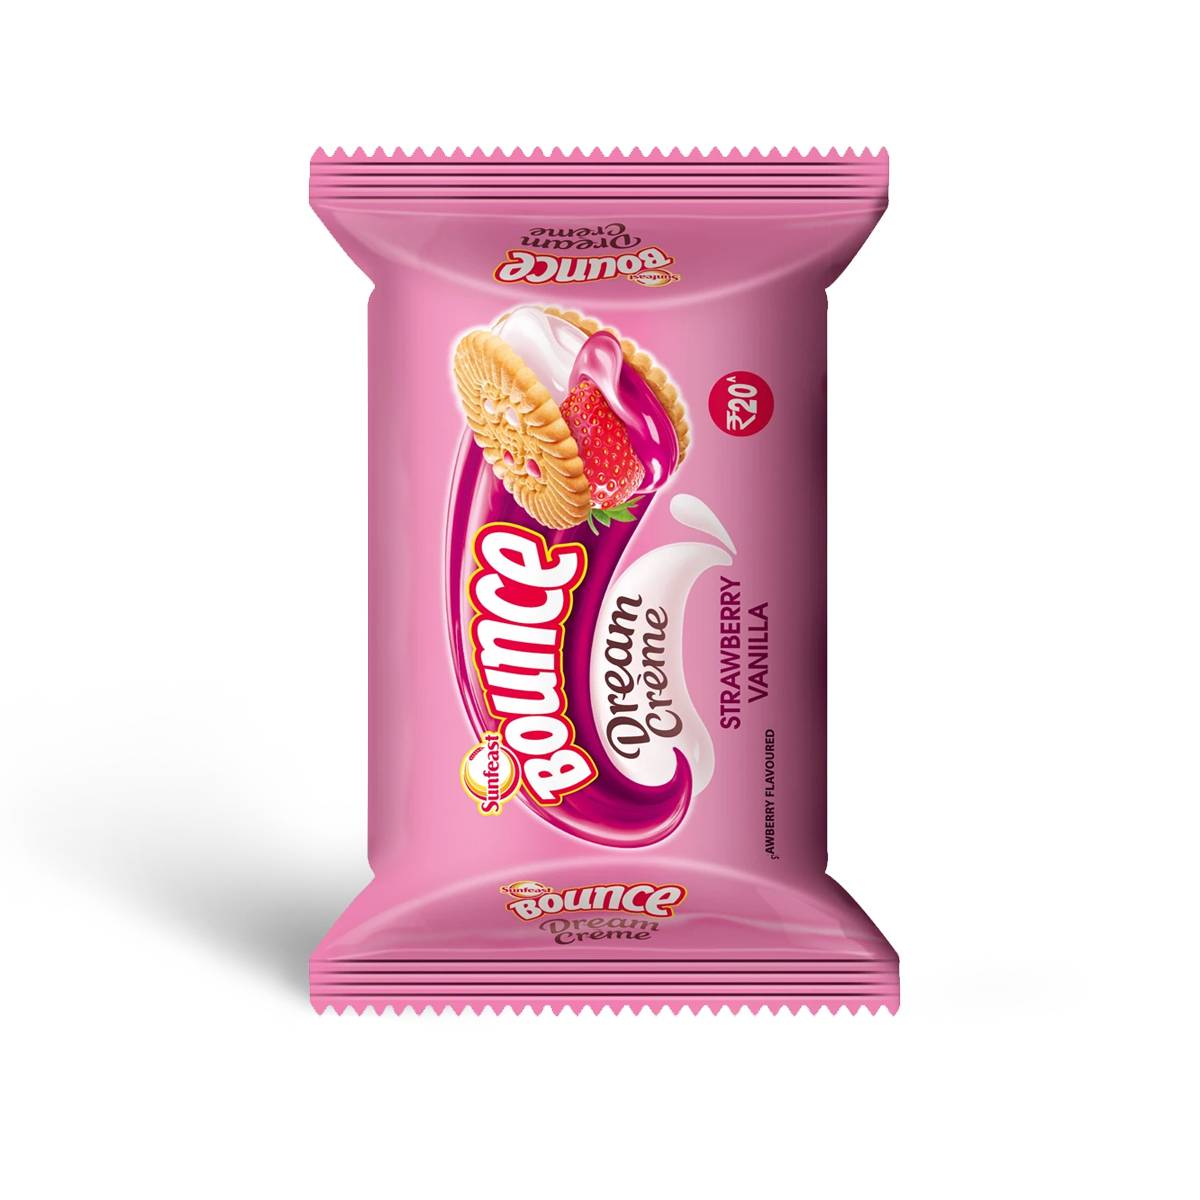 Sunfeast Bounce Cream(strawberry) biscuit 102g